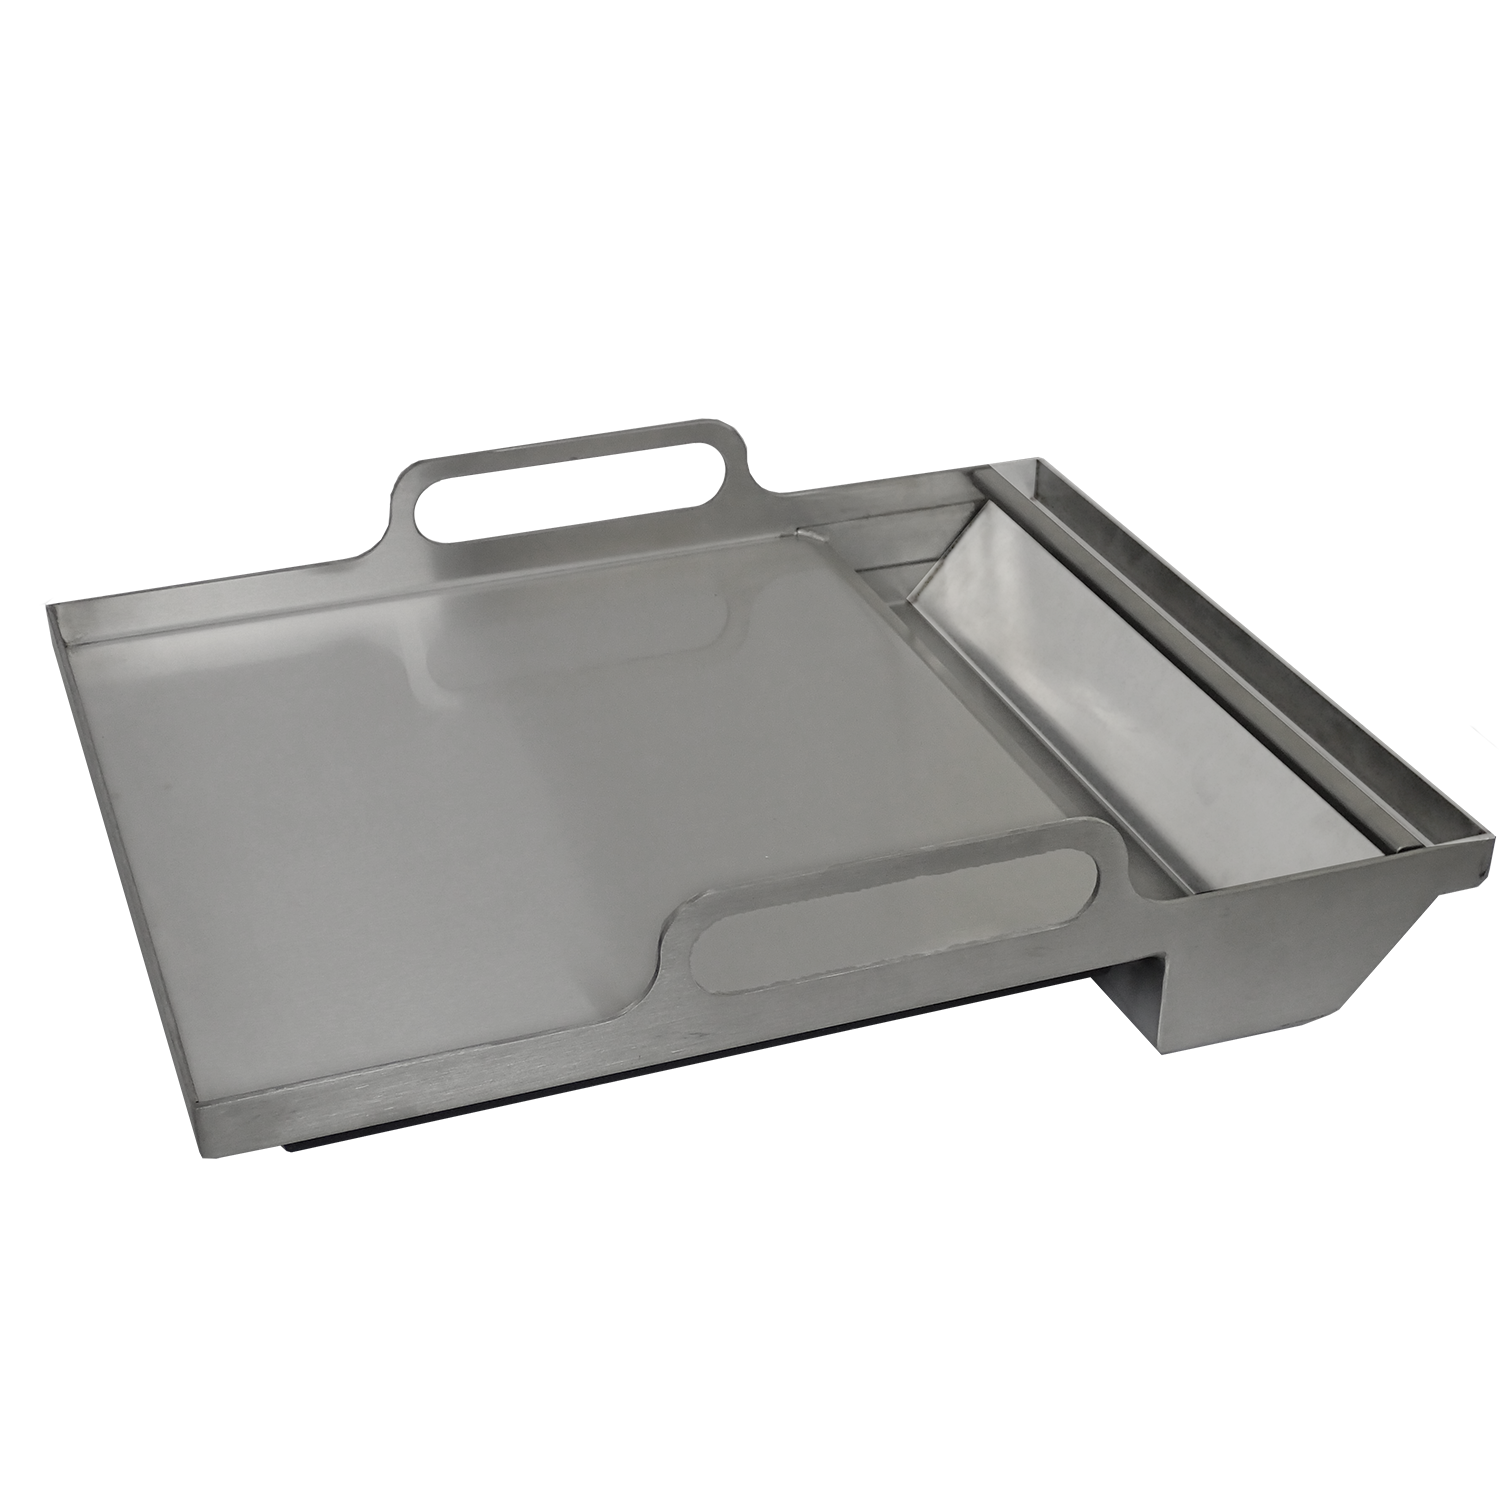 Dual Plate SS Griddle – by Le Griddle for Premier Series Grills (RJC) 14 1/4" x 17 3/4"